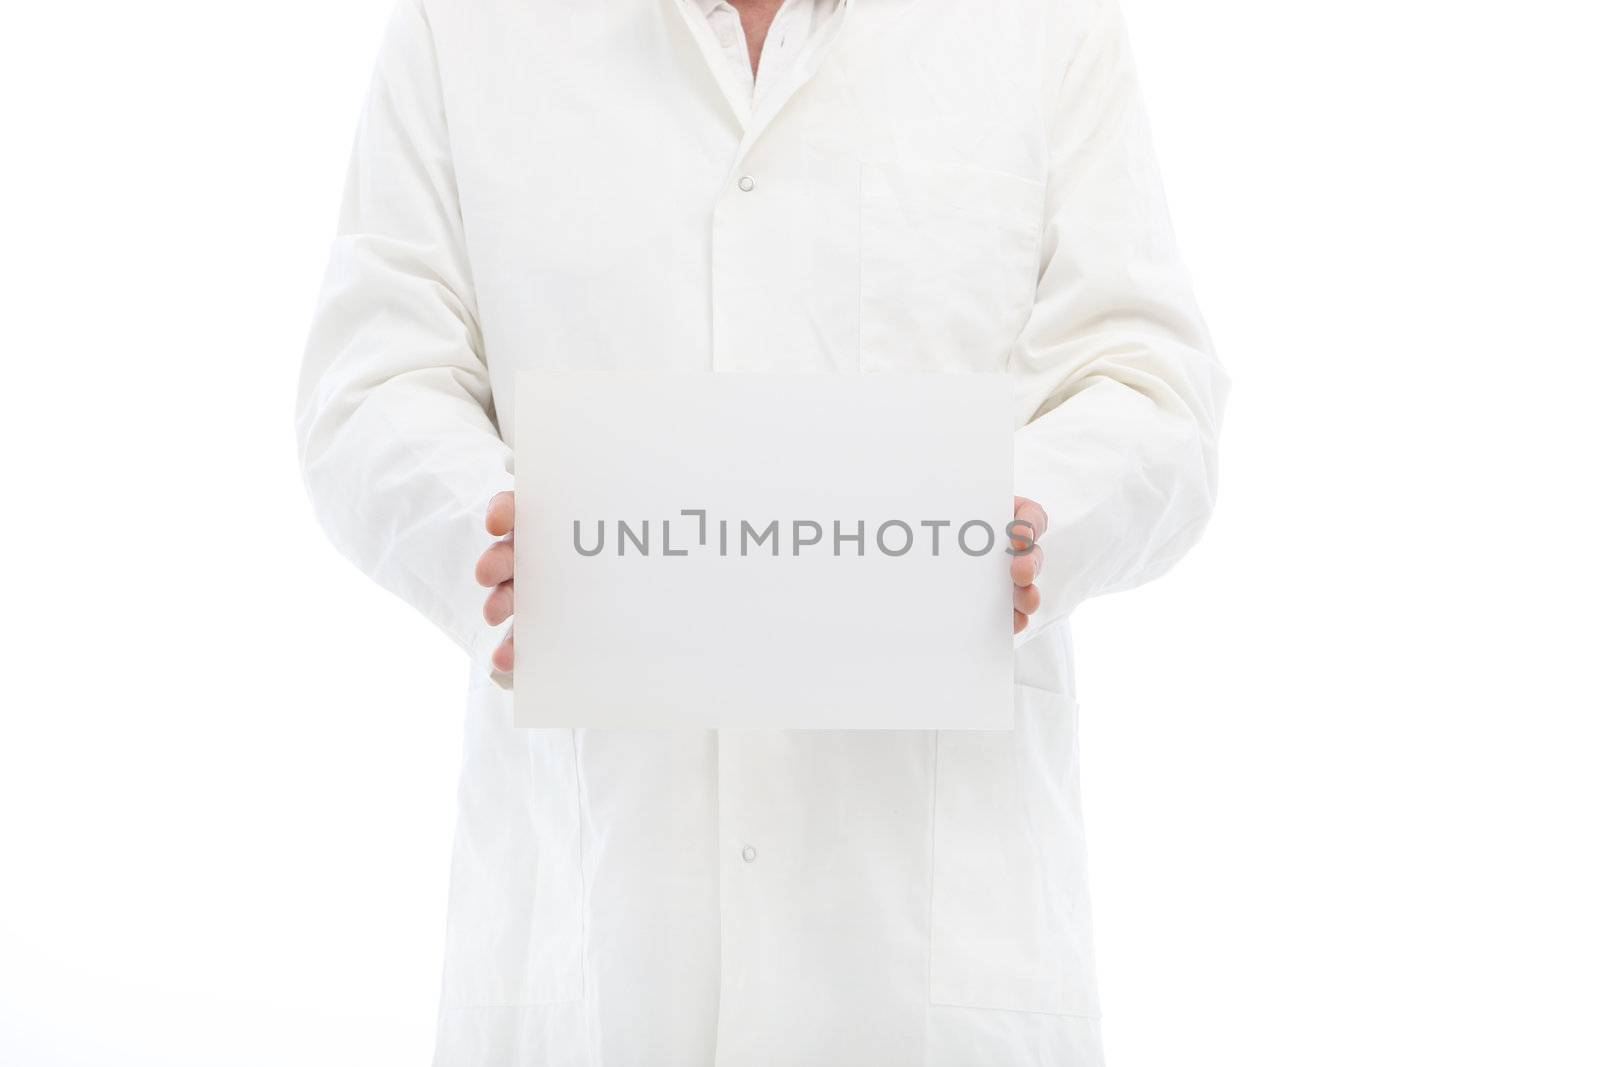 Man in labcoat holding a small poster by Farina6000